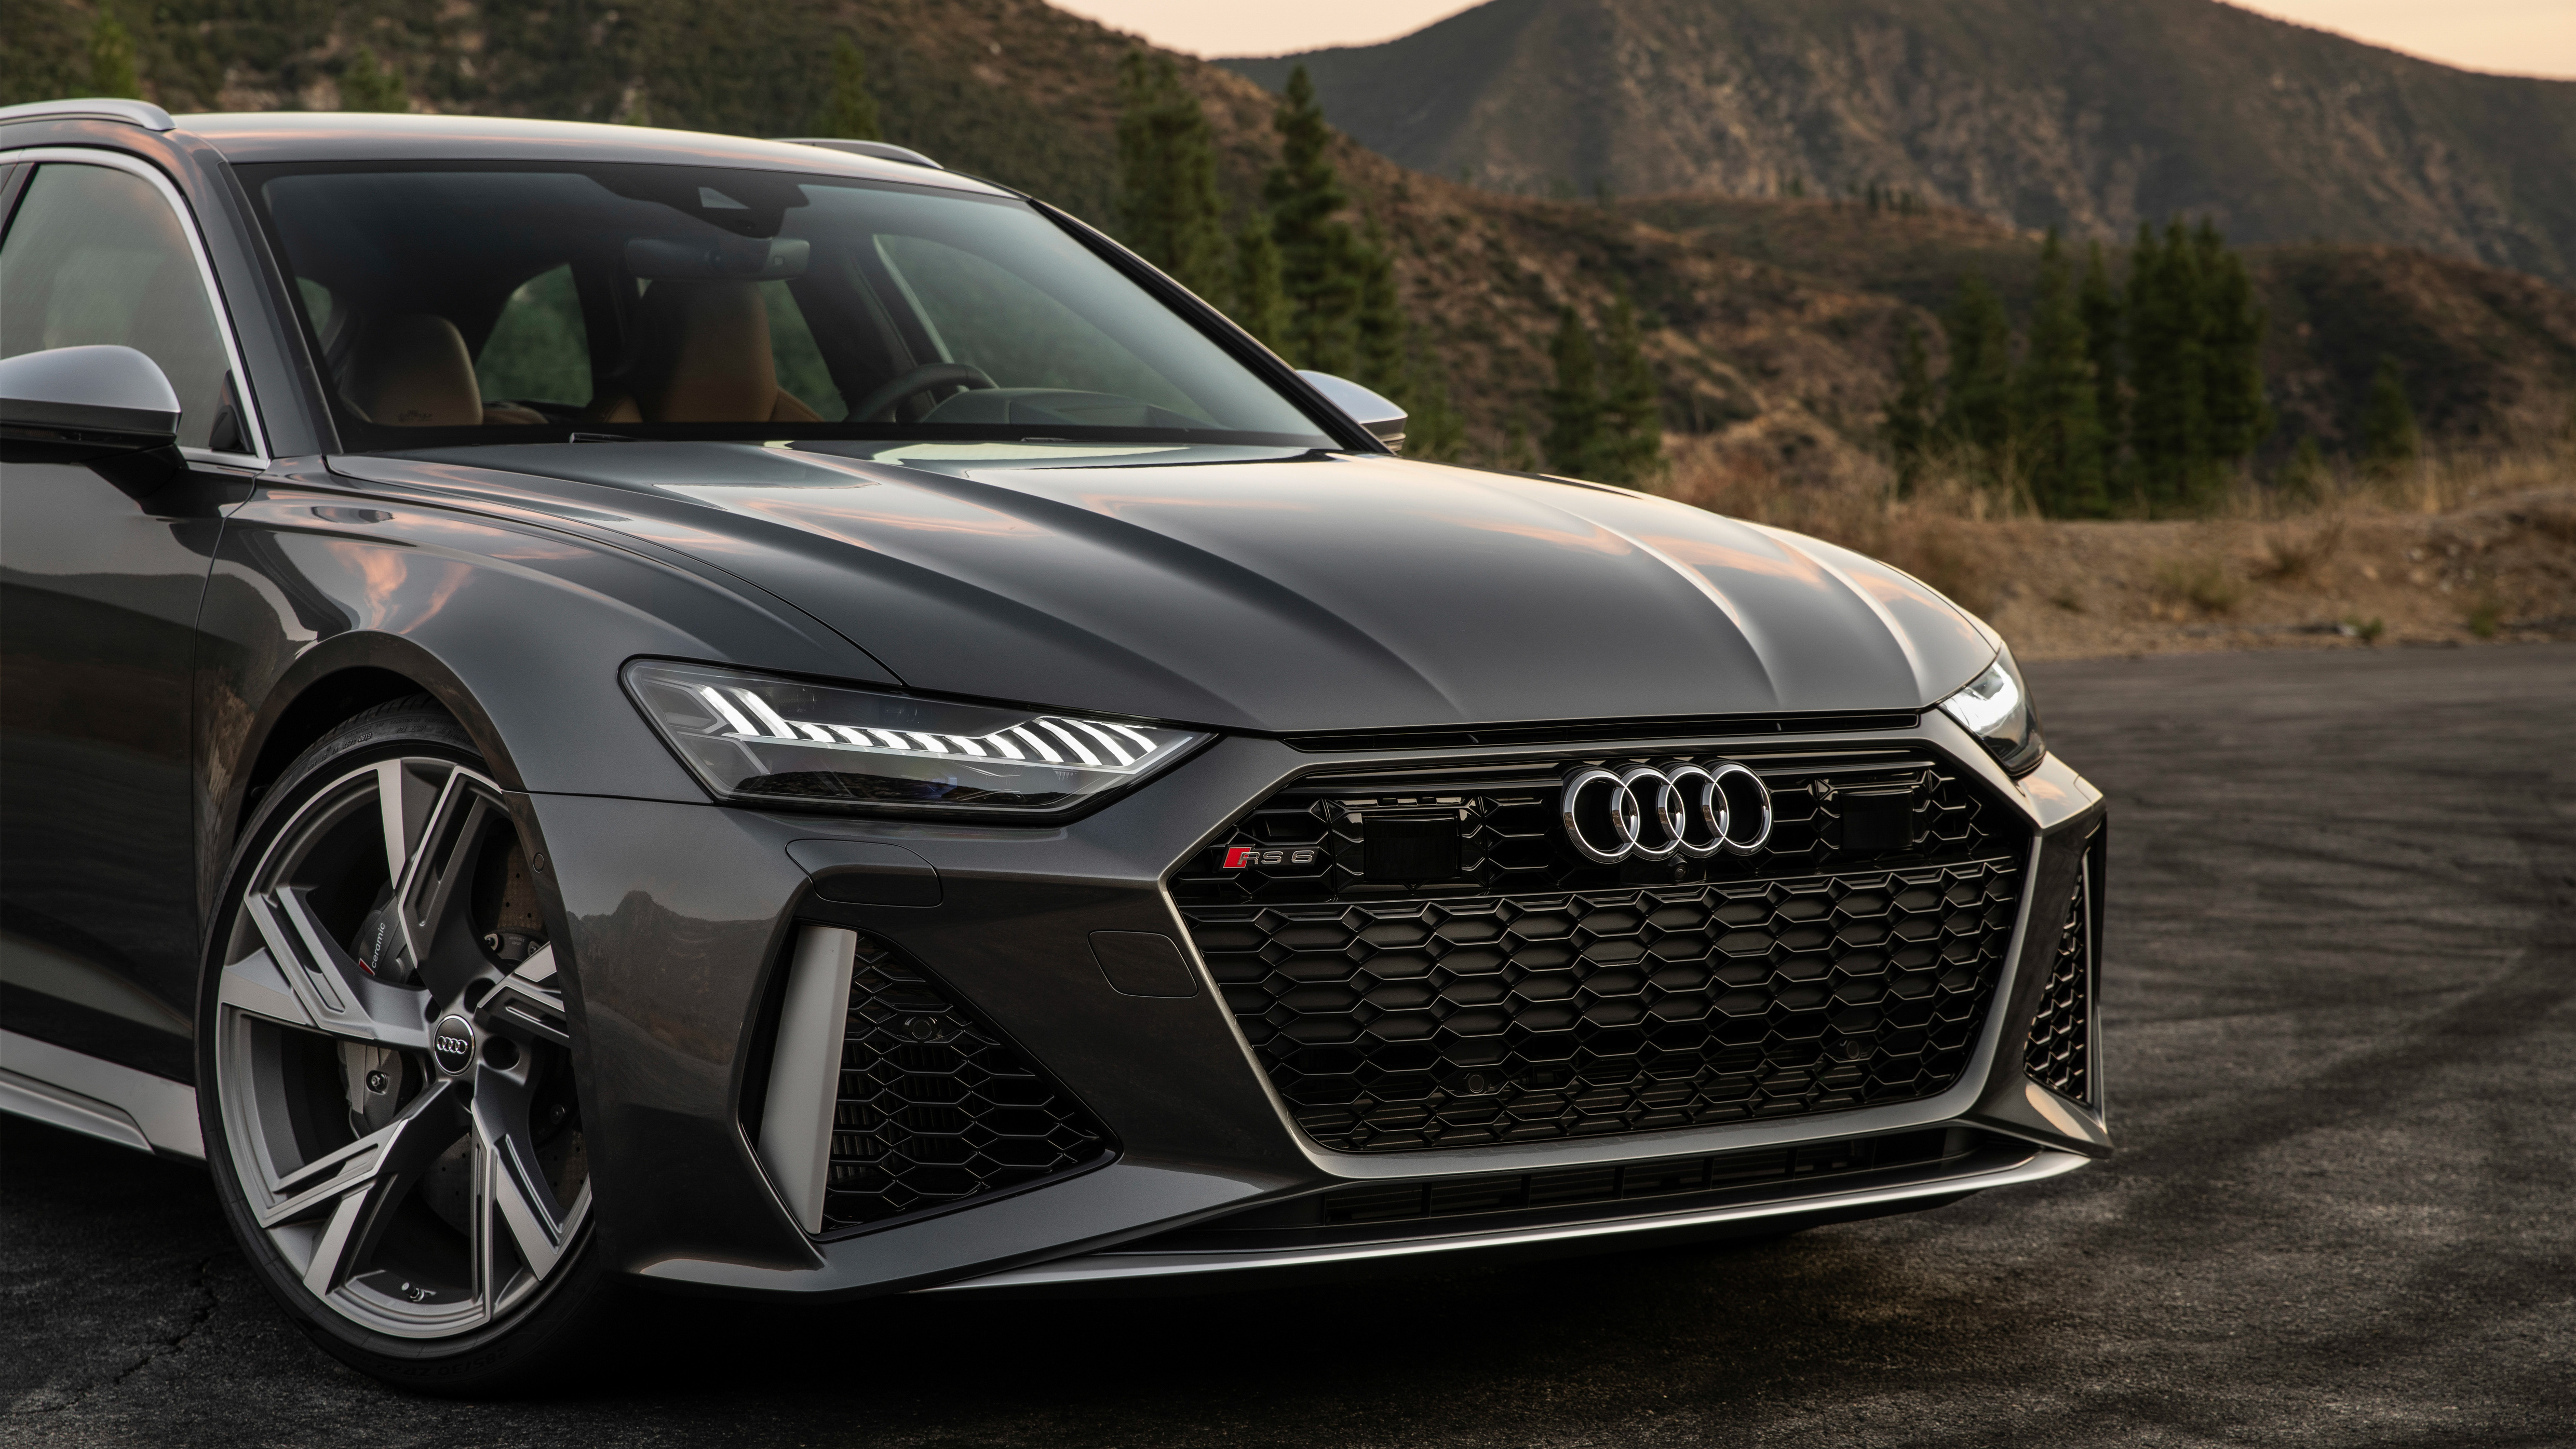 Bold Luxury: The 2020 Audi RS6 GTO Concept